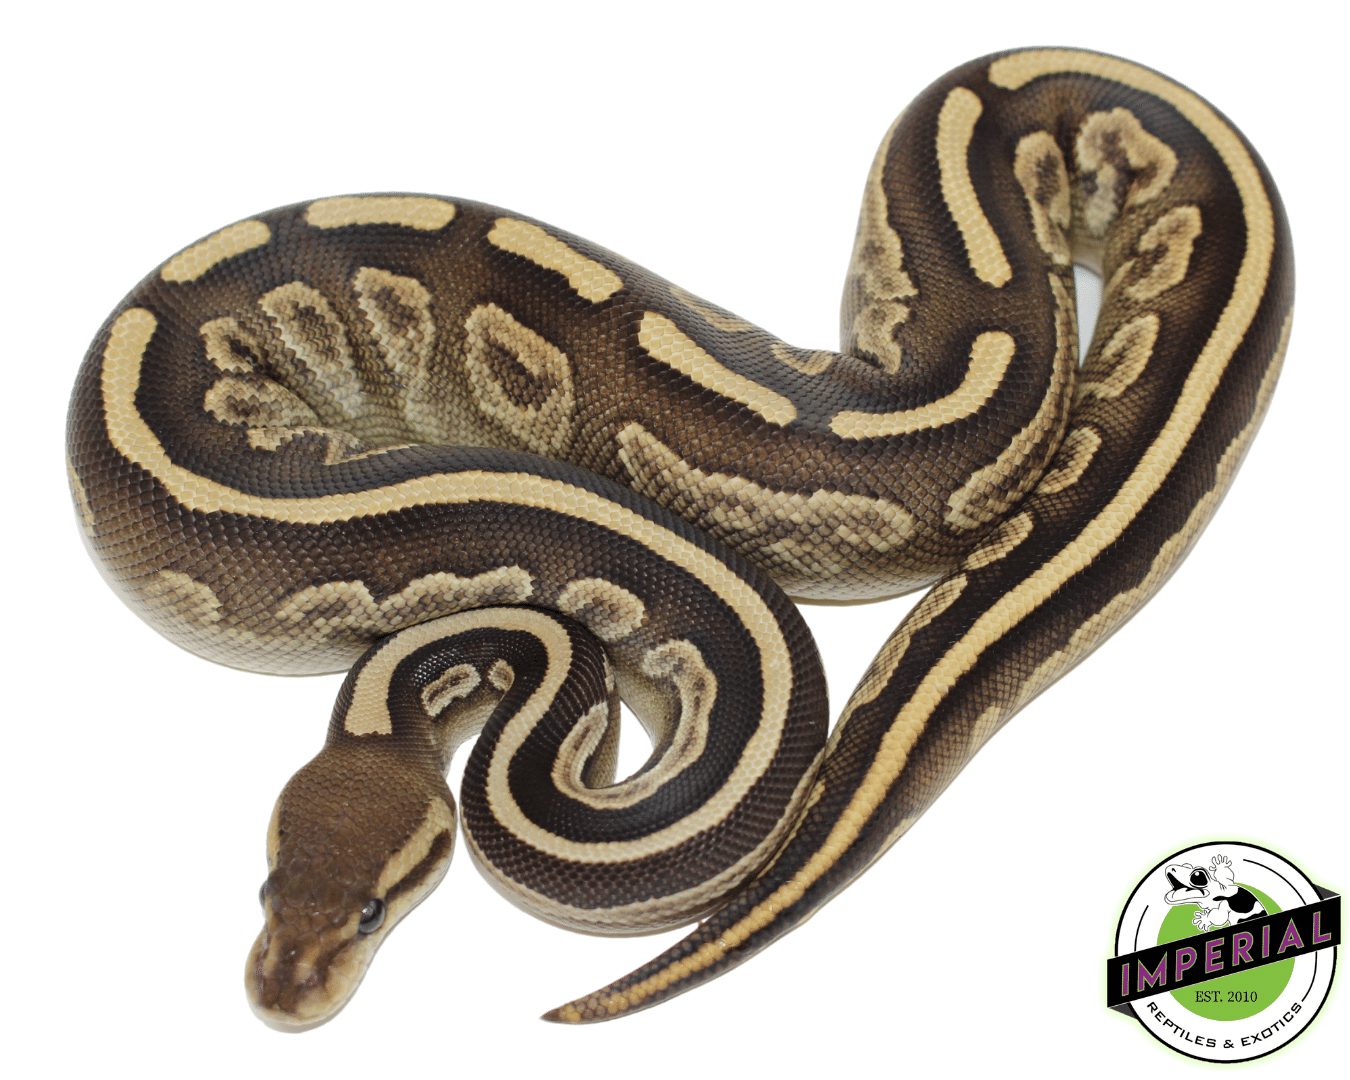 Black Magic ball python for sale, buy reptiles online